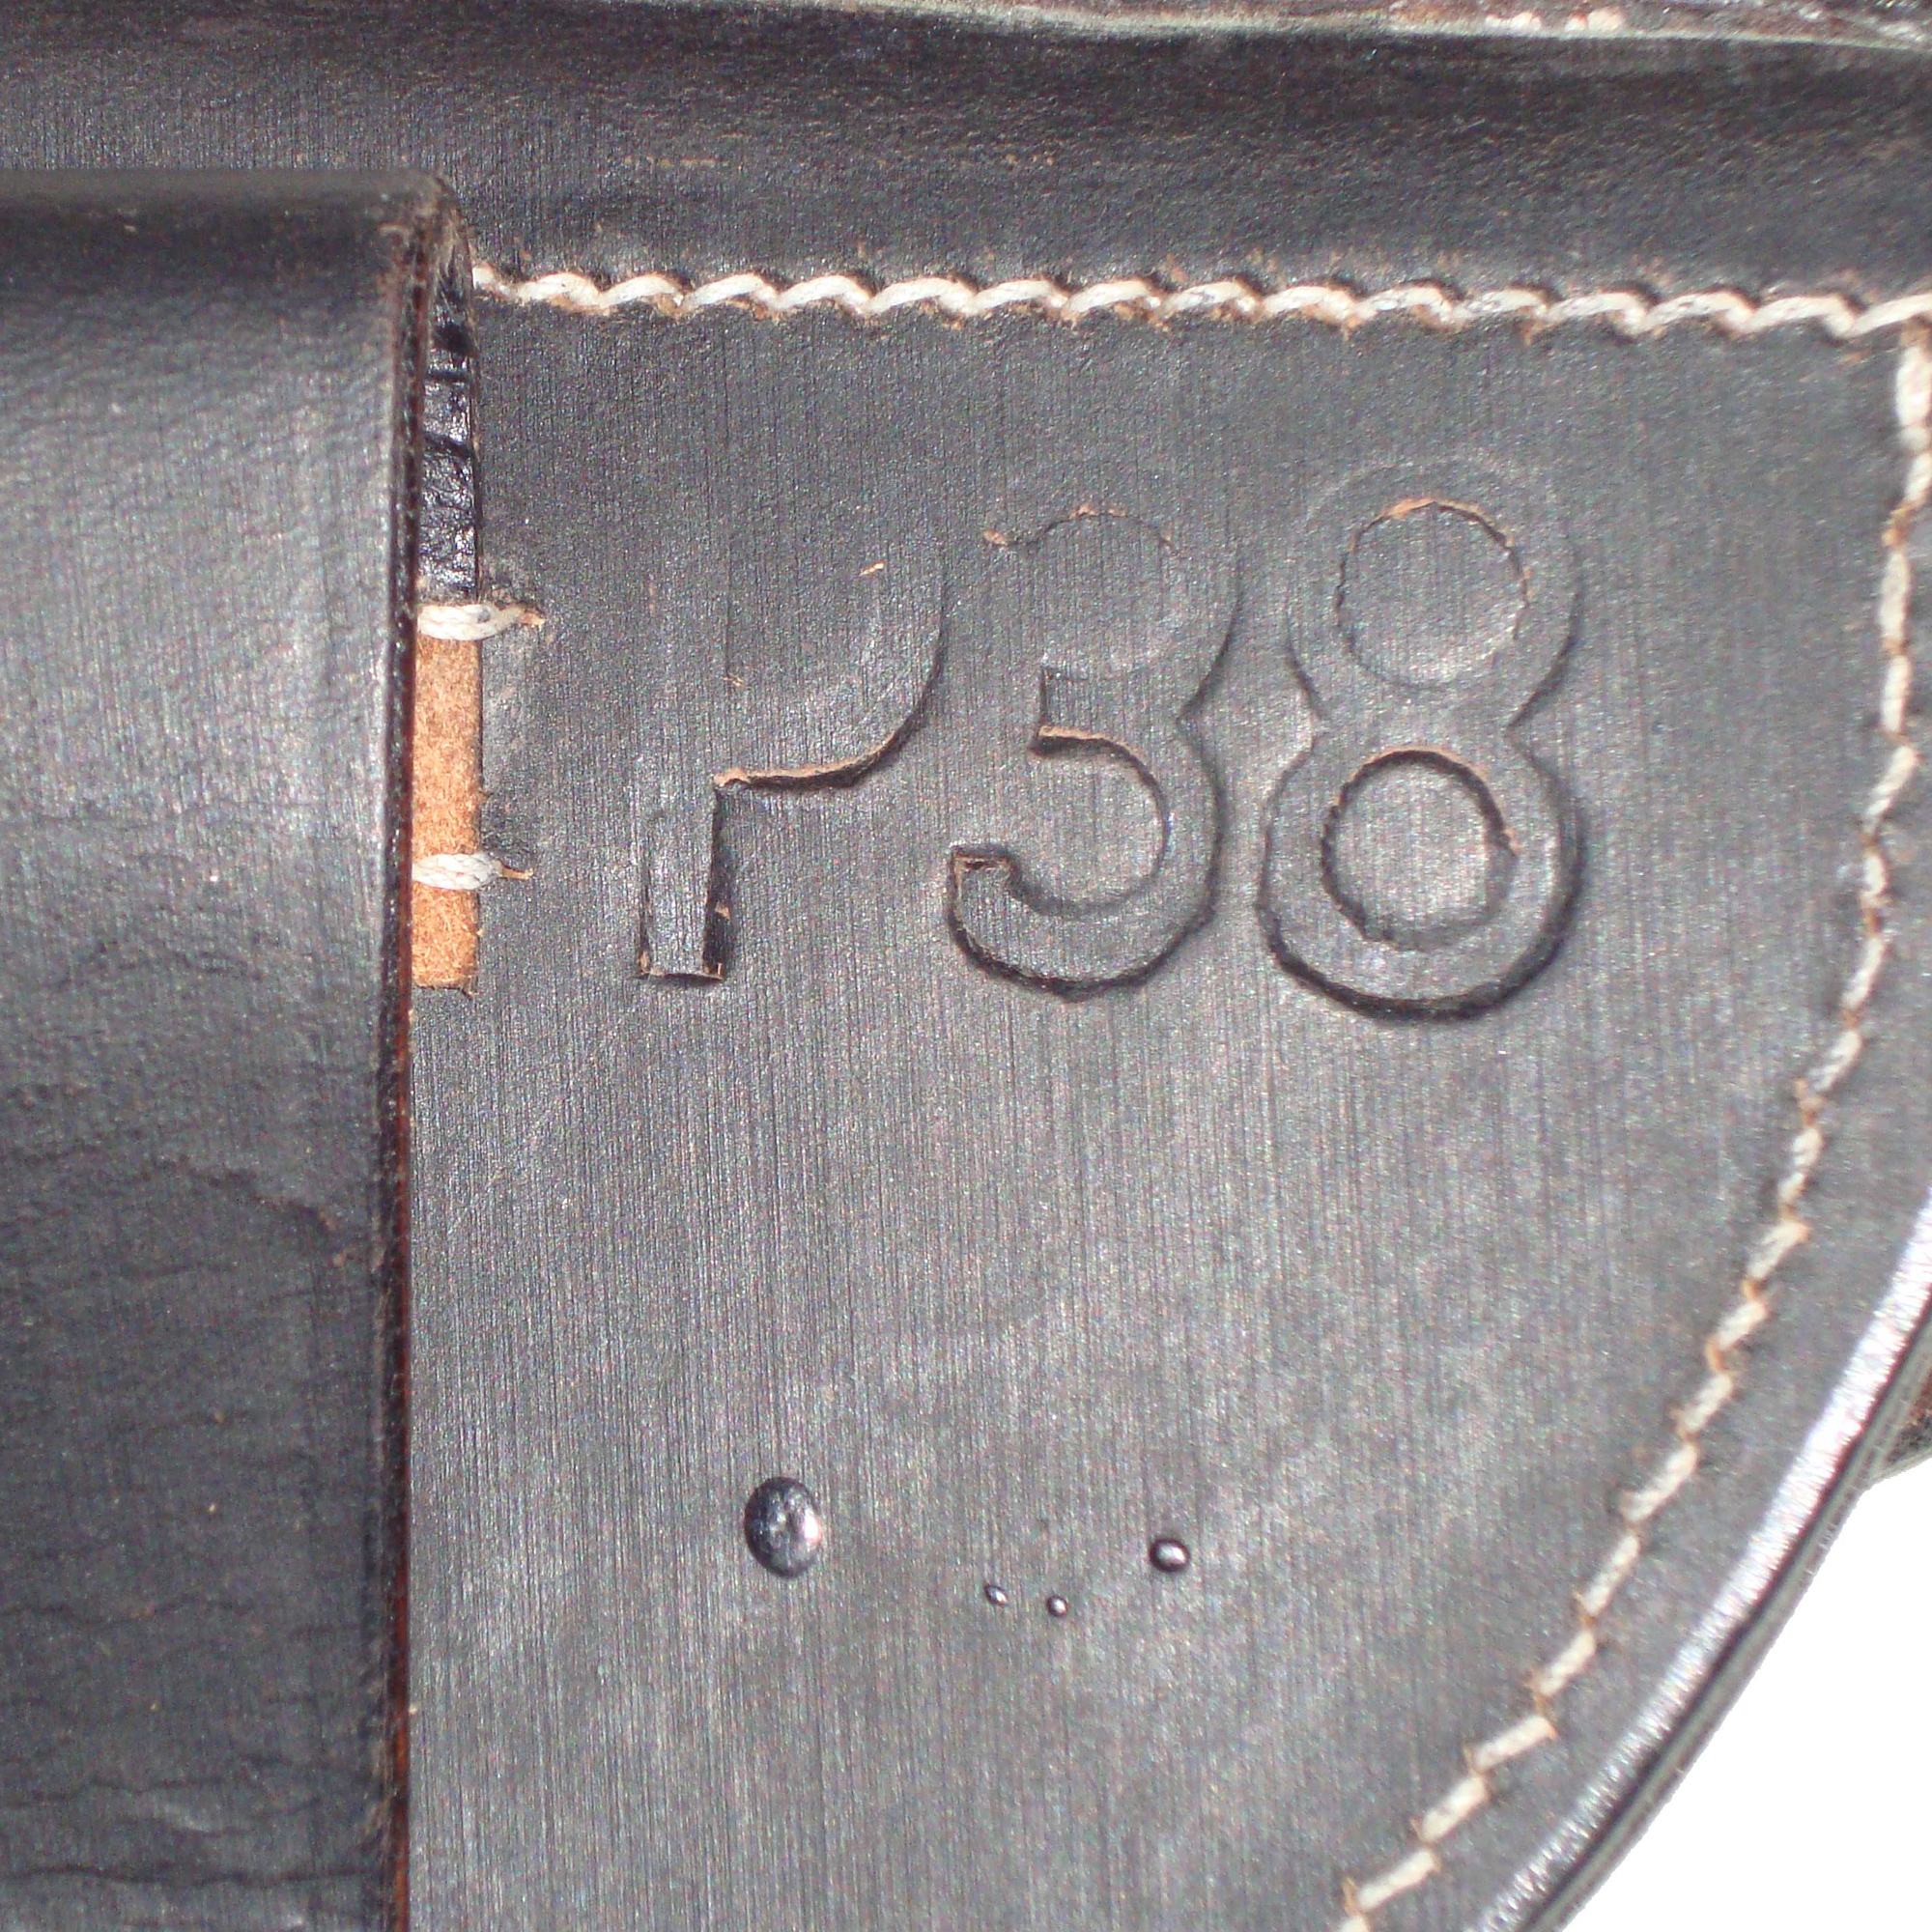 Reproduction Oy510 Details about   WWII German Leather Holster Luger P38